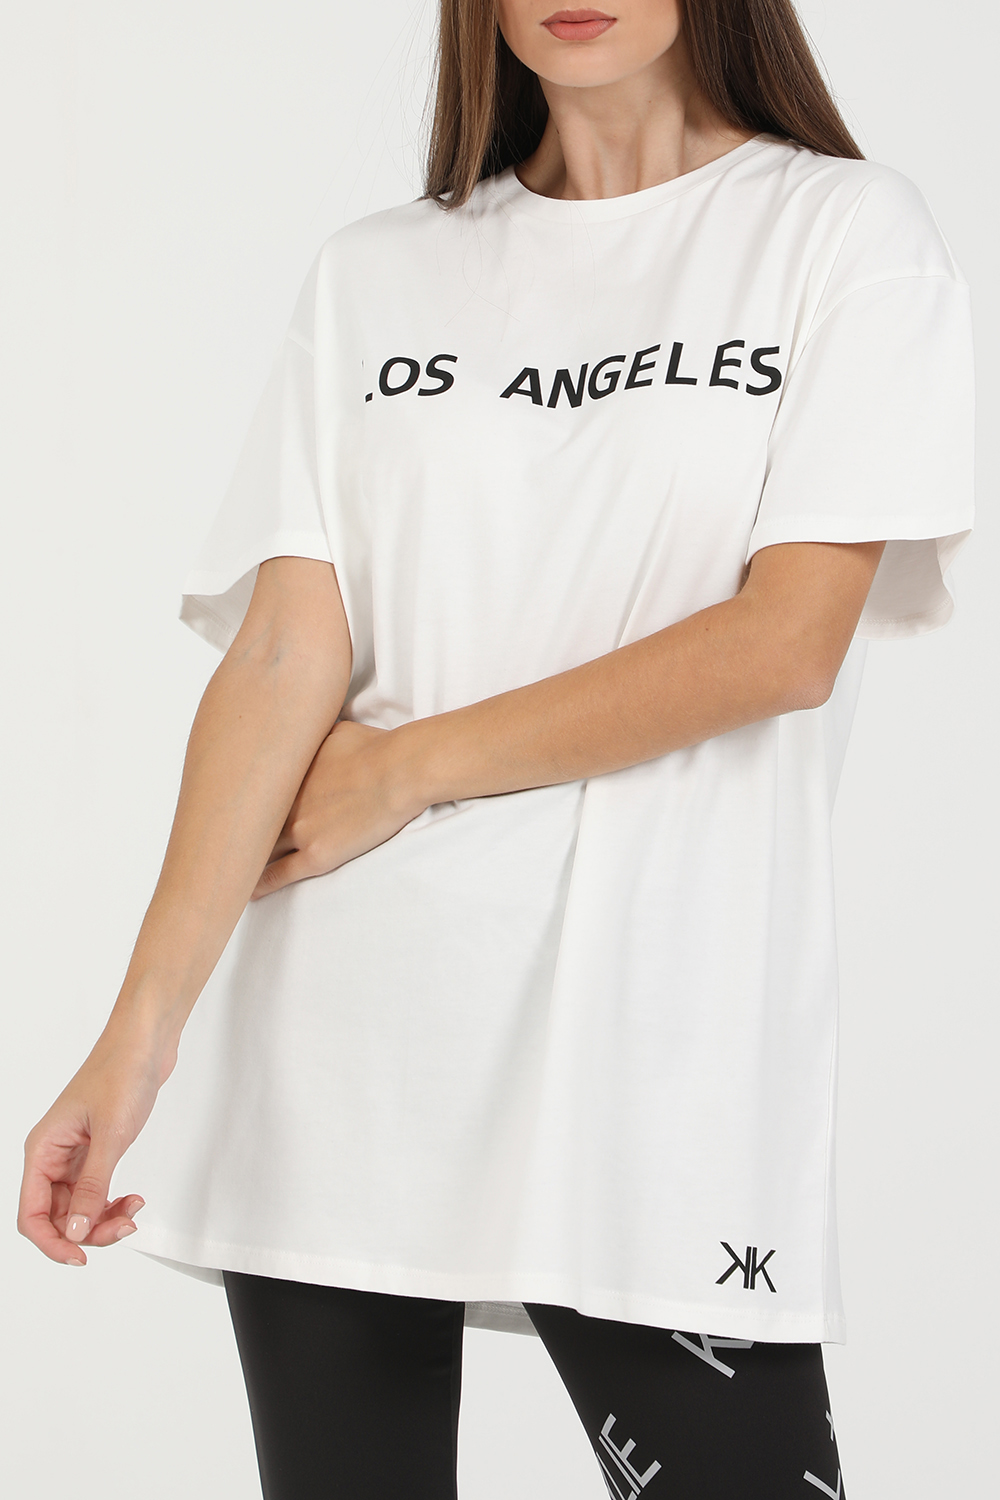 KENDALL + KYLIE – Γυναικειο t-shirt KENDALL + KYLIE W ACTIVE LA OVERSIZED λευκο